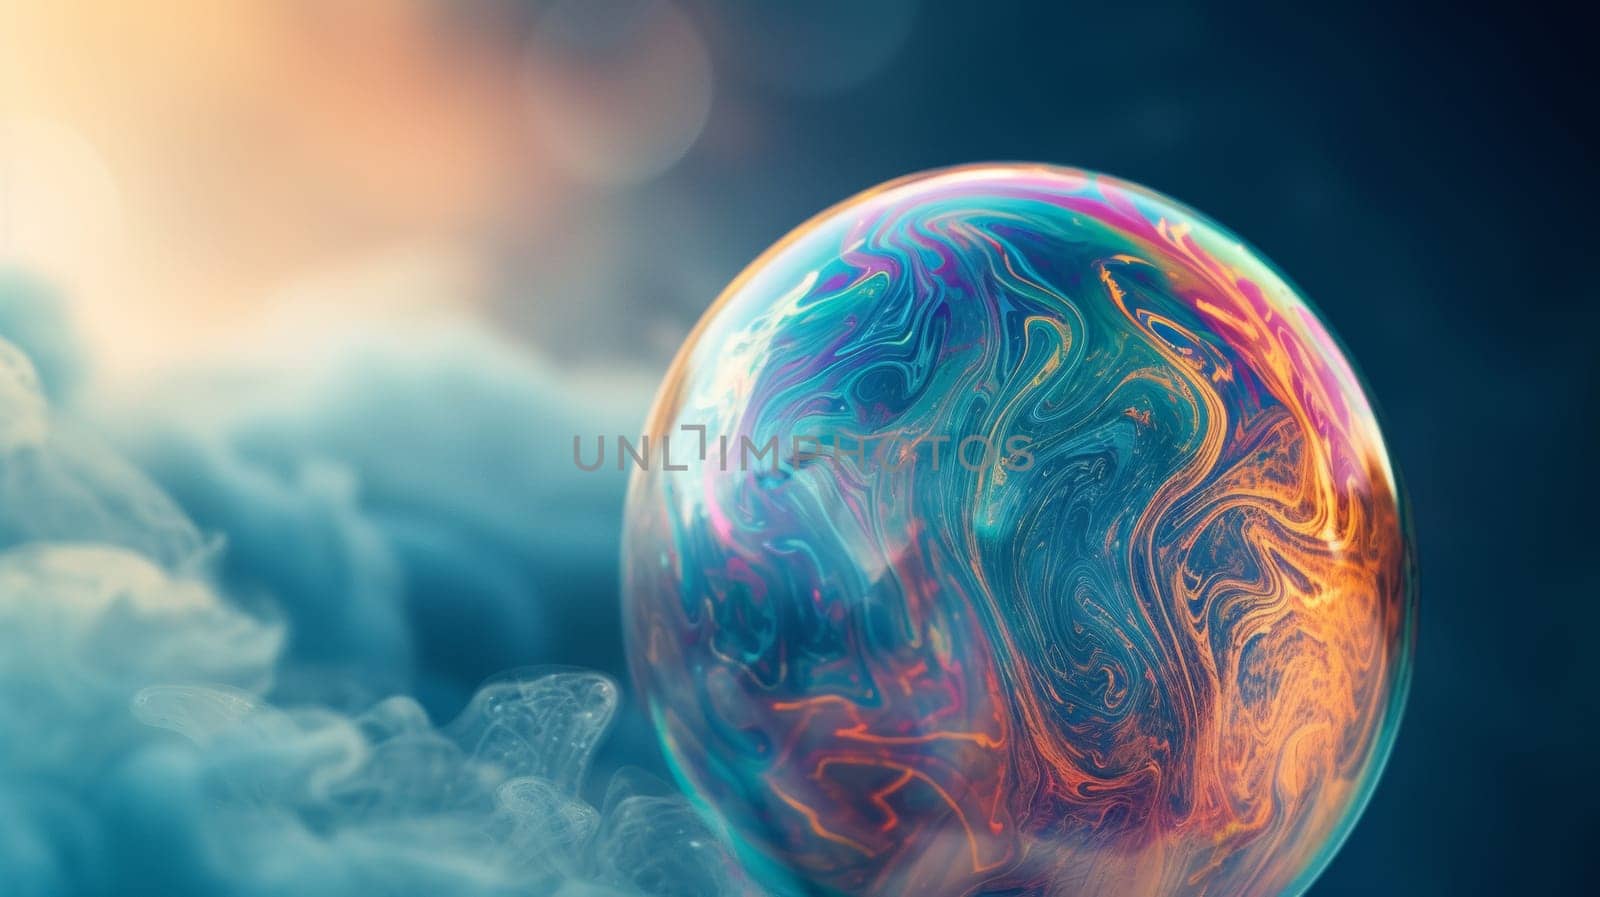 A close up of a bubble with colorful swirls on it